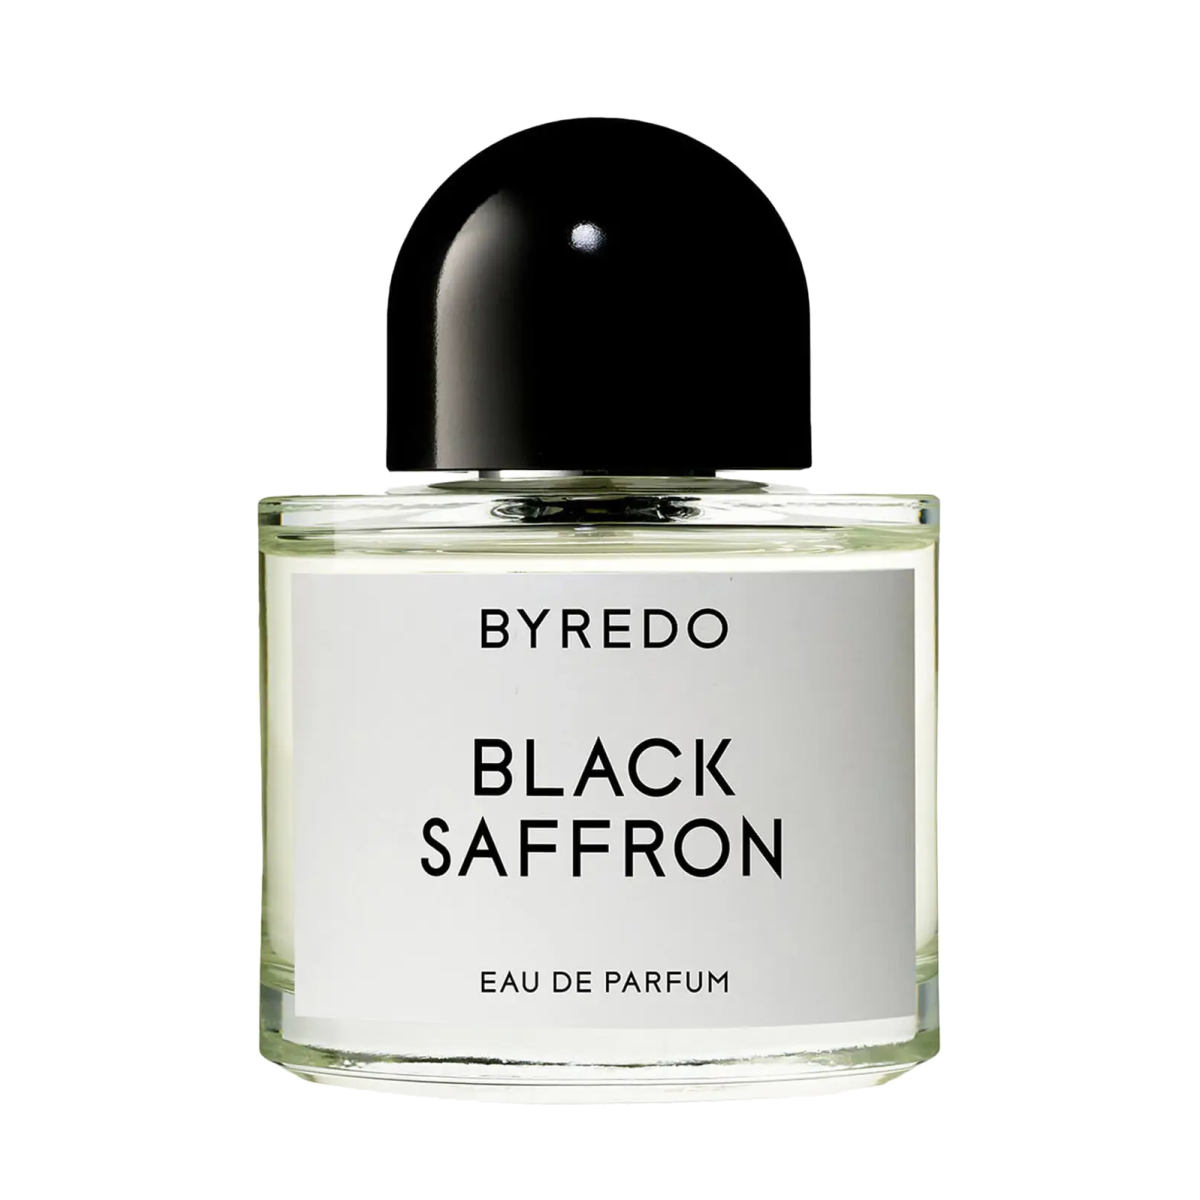 Clear Byredo perfume bottle with a black rounded cap